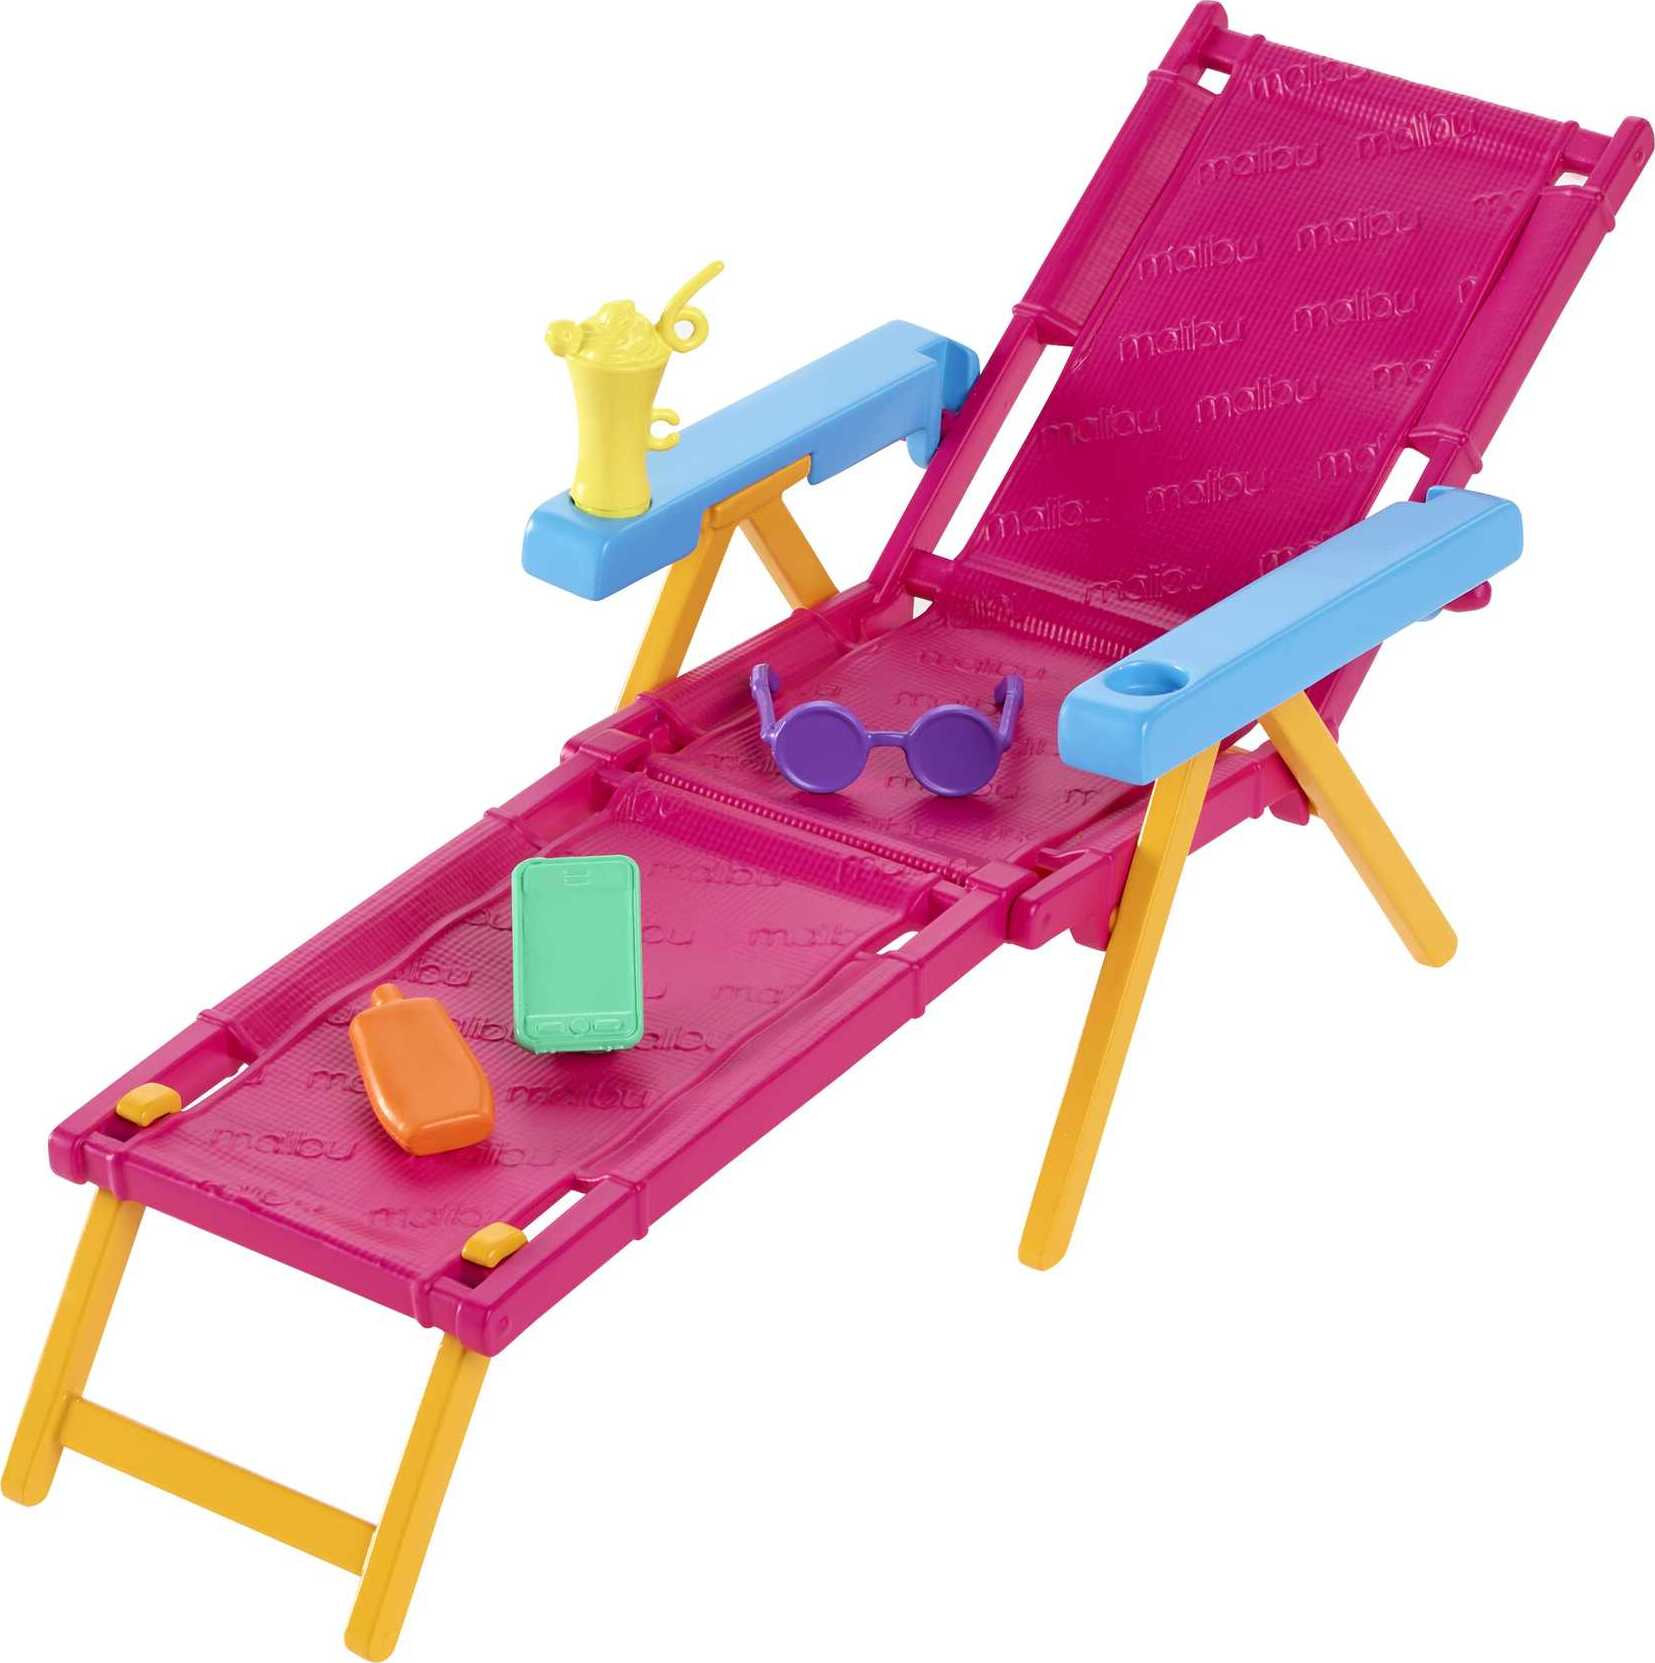 Barbie Loves the Ocean Beach-Themed Playset, Made from Recycled Plastics - image 4 of 6